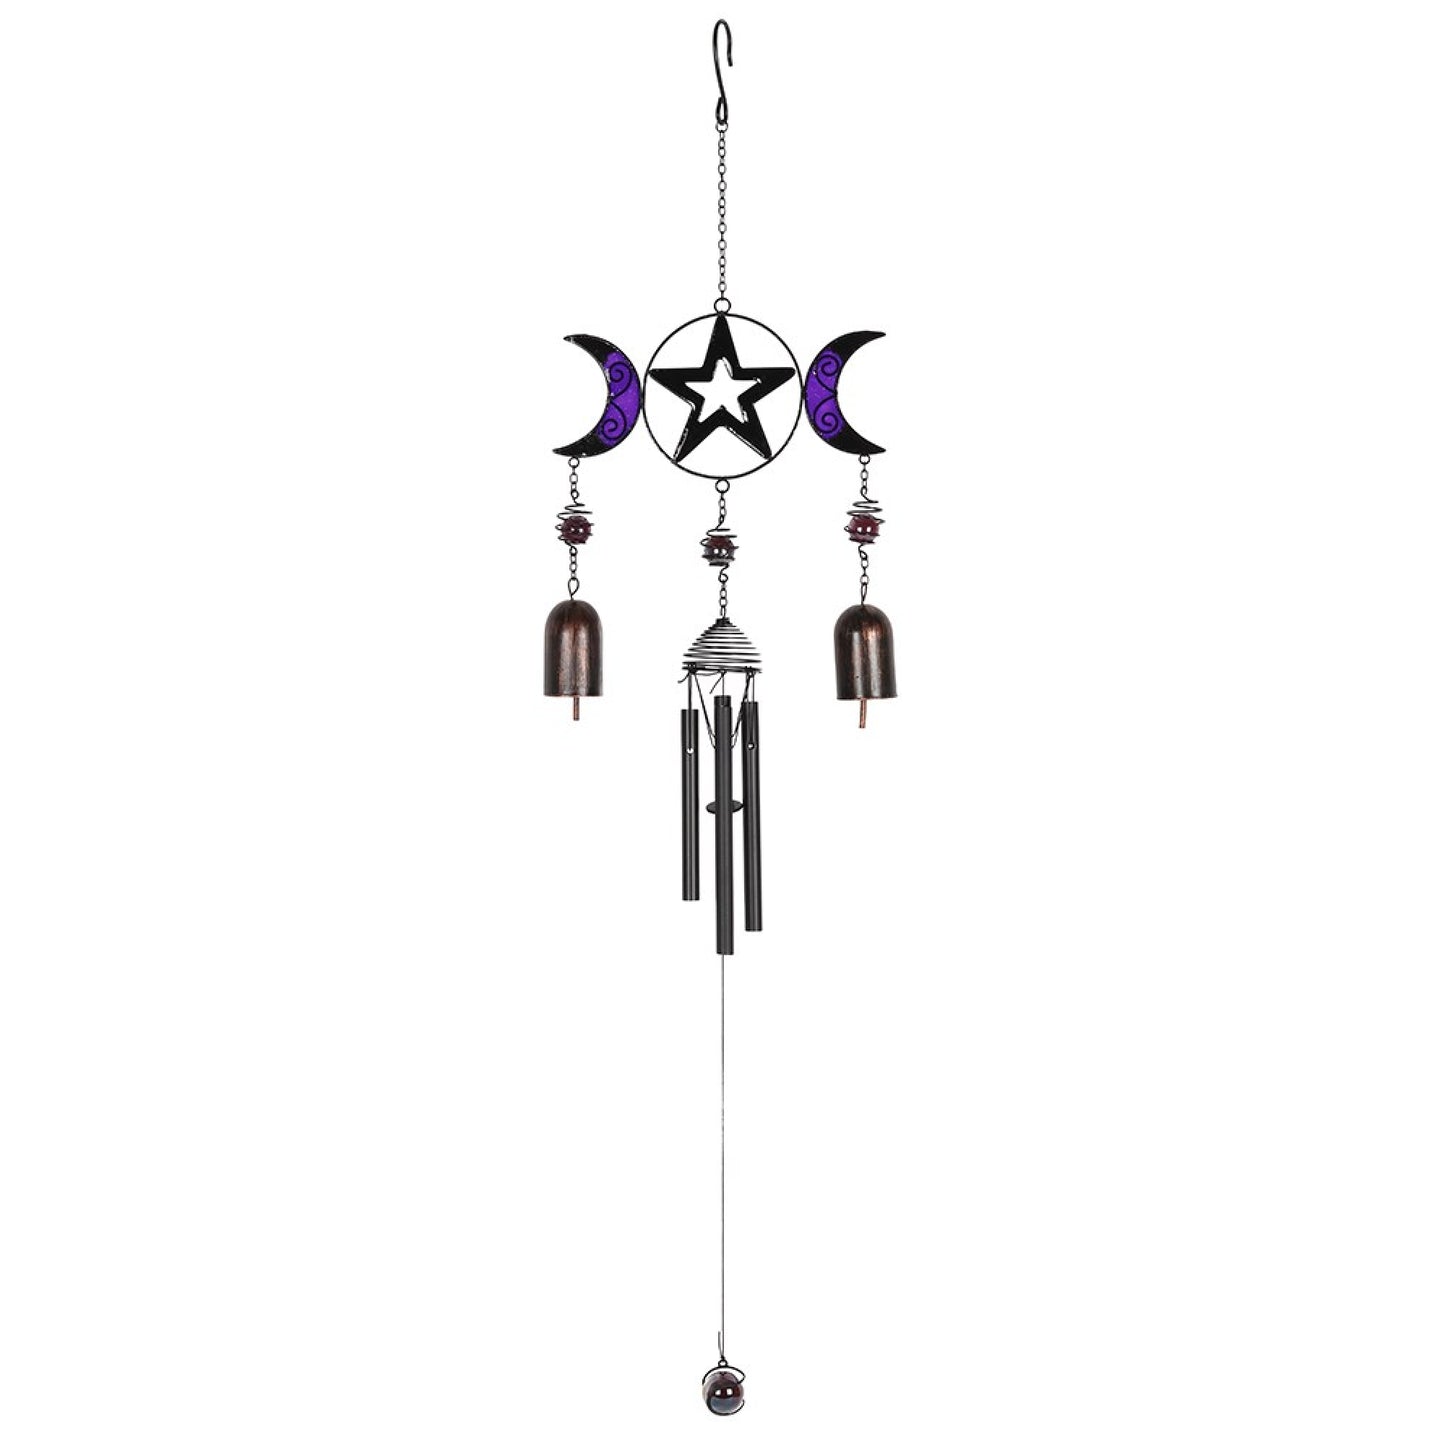 This Triple Moon windchime sounds truly magical thanks to its melodic bells which tinkle when caught in the breeze.  A lovely accessory to brighten up the garden or by an open window in your home.  Materials Polyresin & Metal Dimensions H 42cm x W 17cm x D 4cm